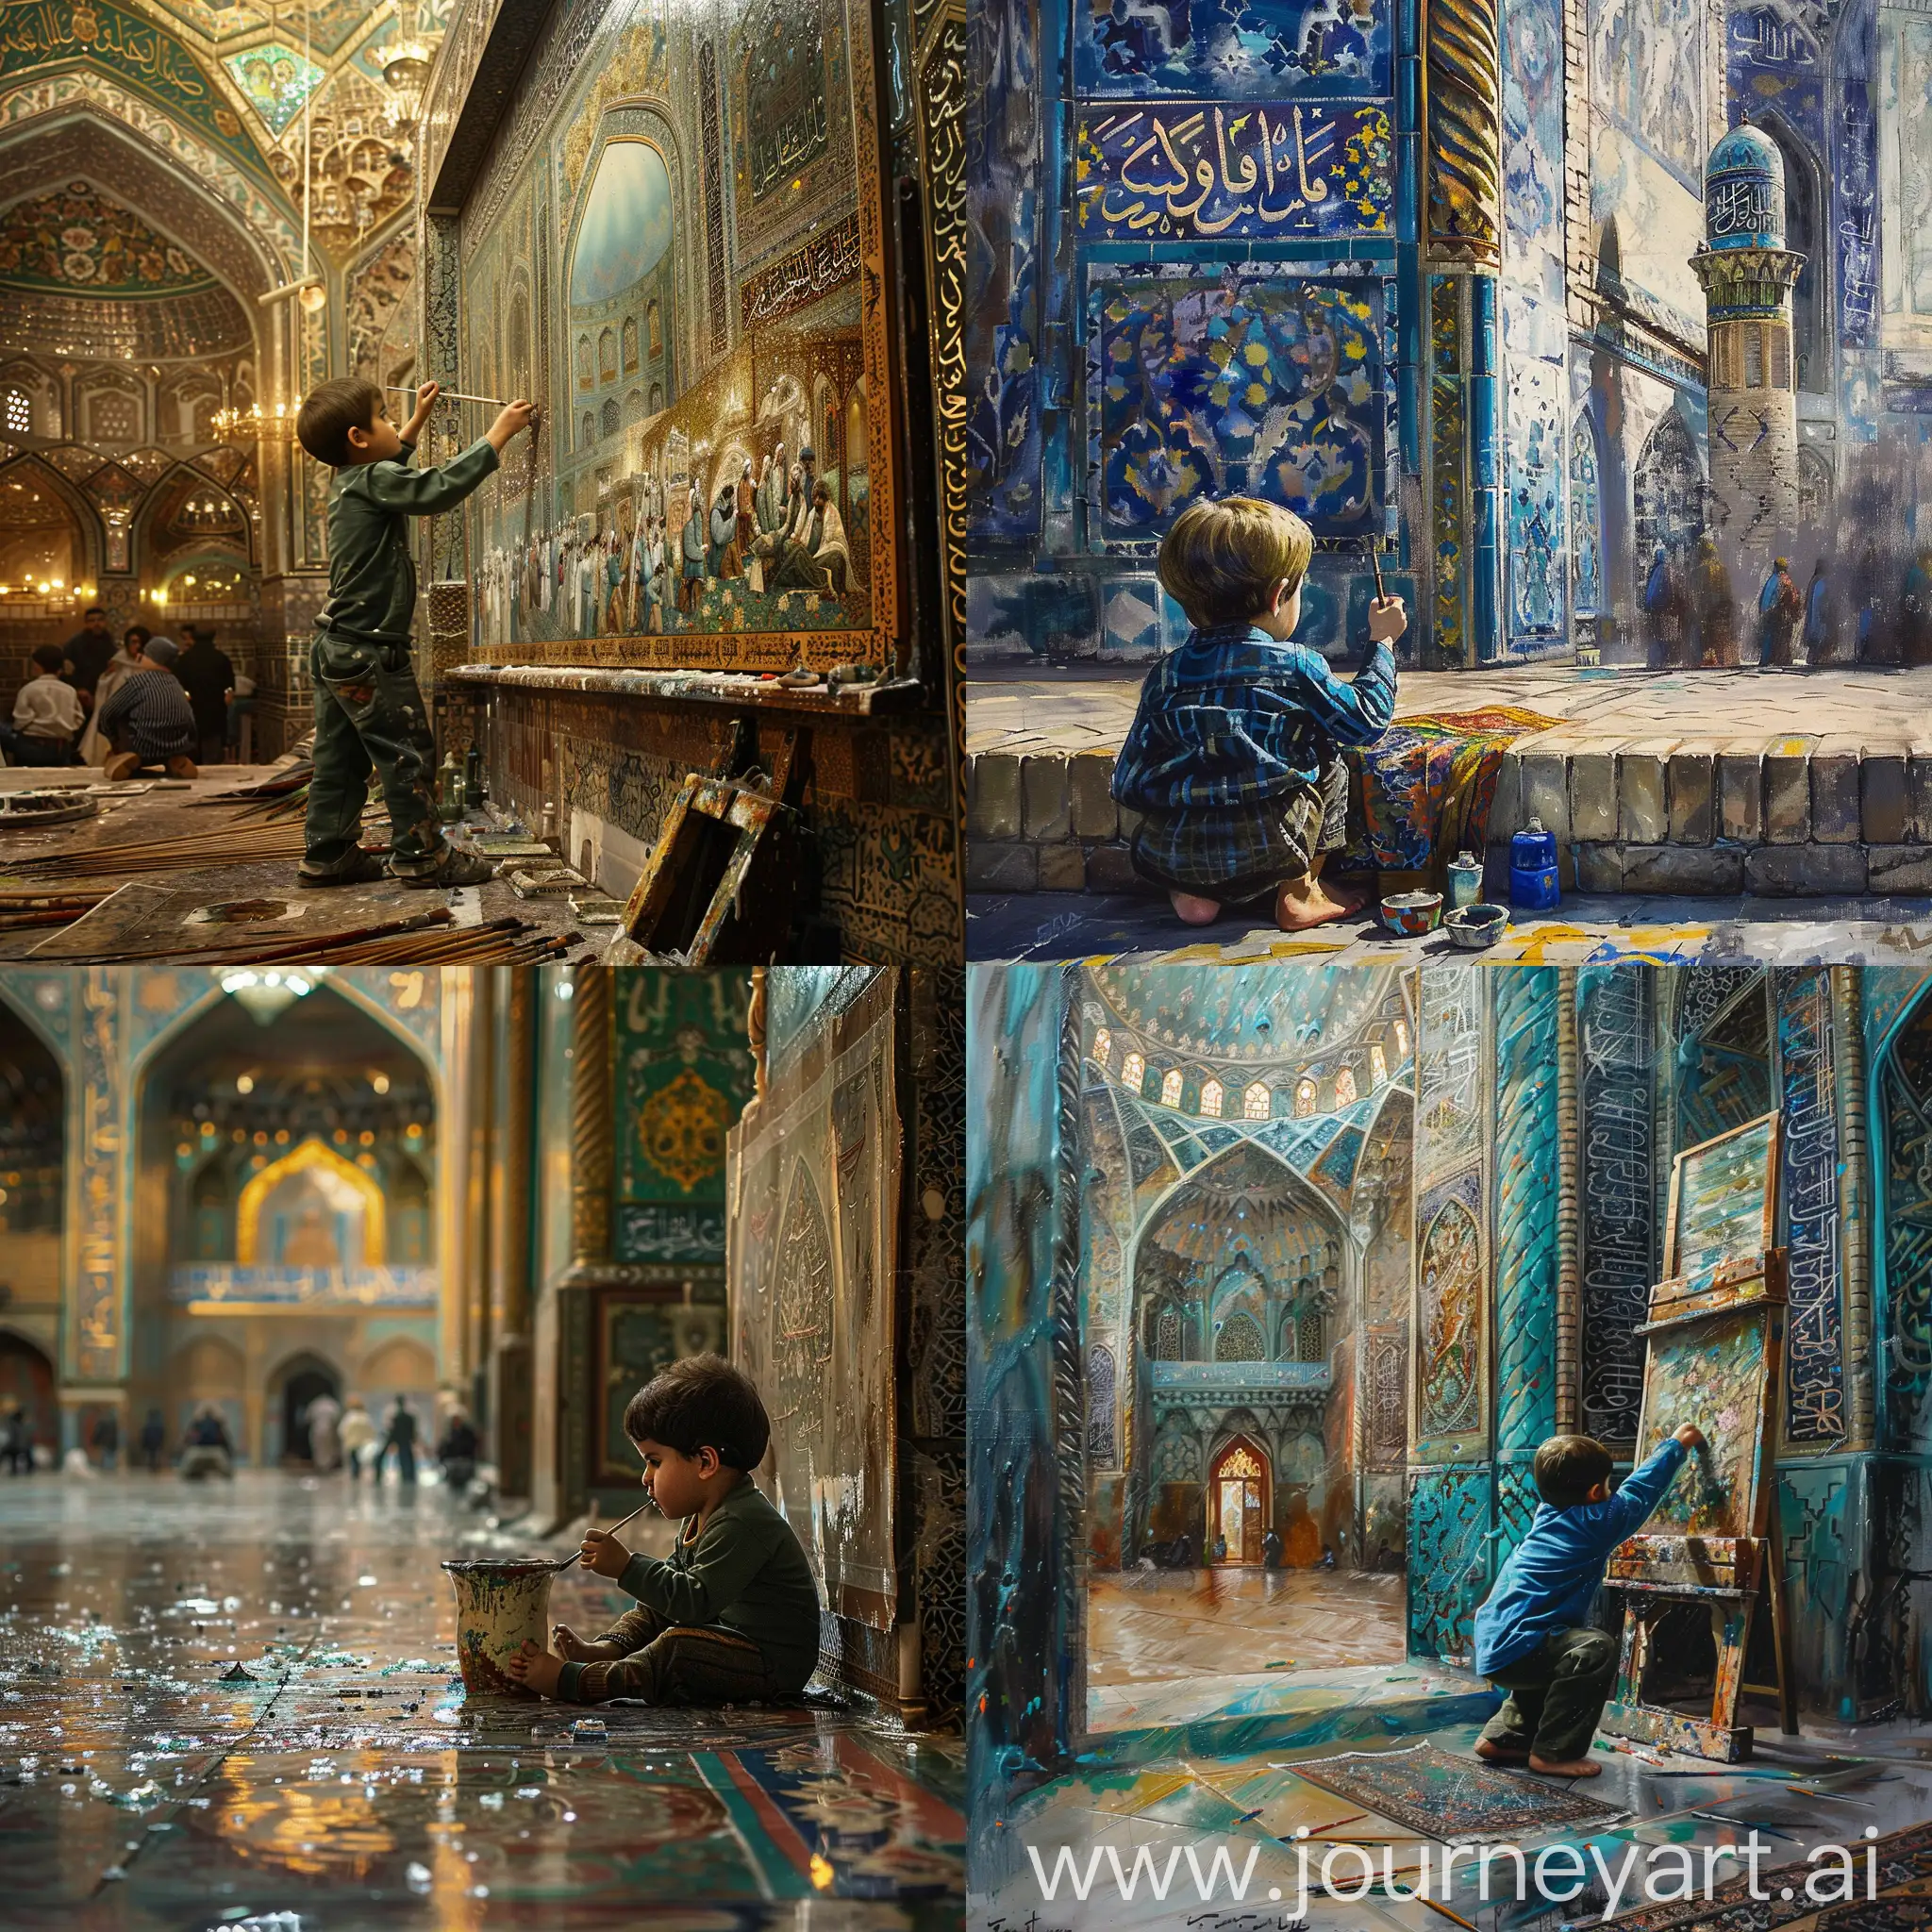 Give me the picture of the kid in Imam Reza's shrine who is painting